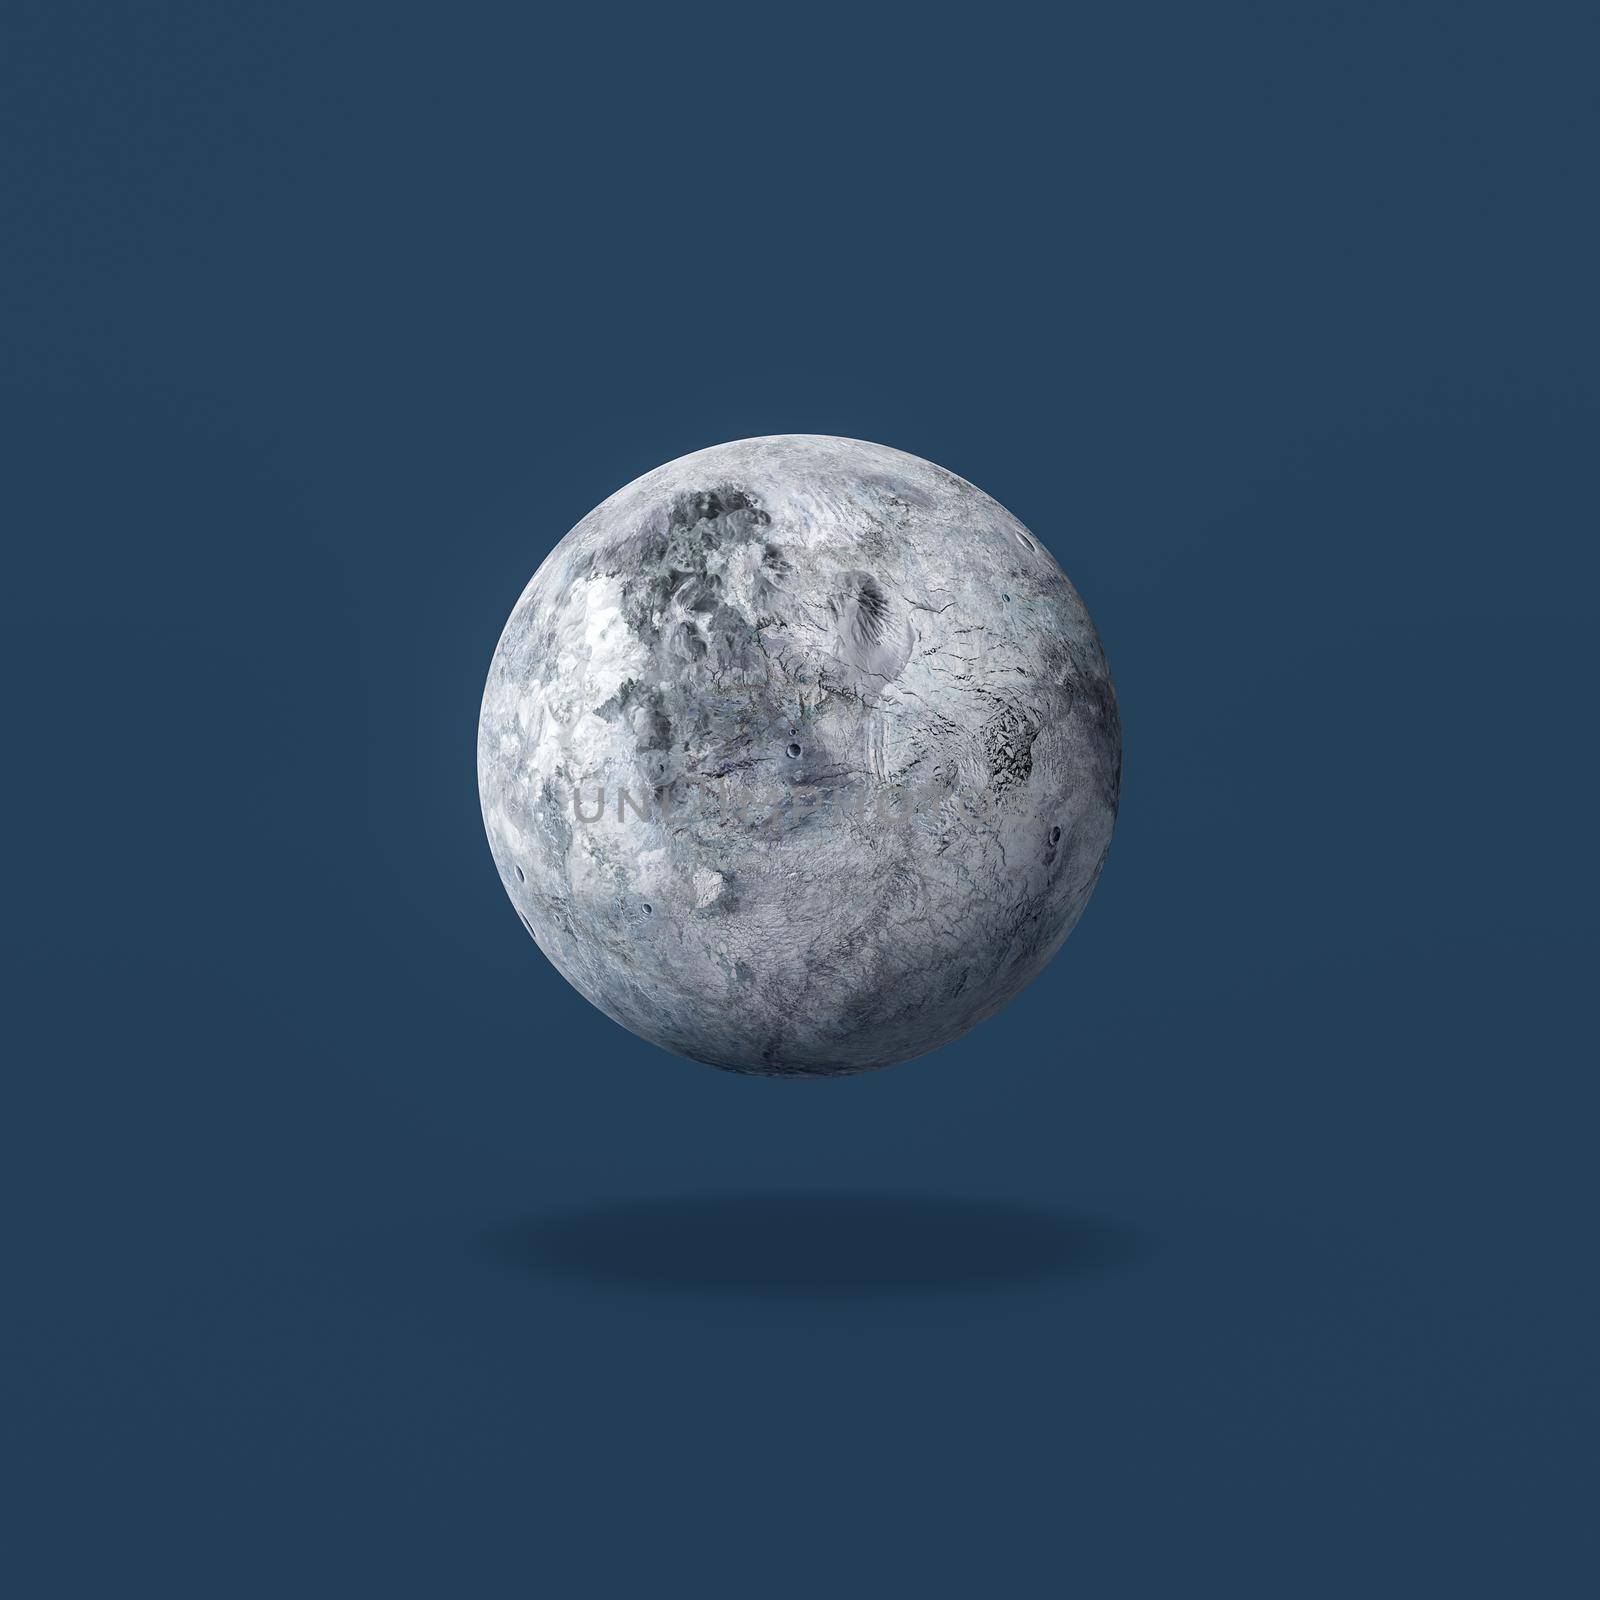 Eris Planet Isolated on Flat Blue Background with Shadow 3D Illustration. Texture from solarsystemscope.com